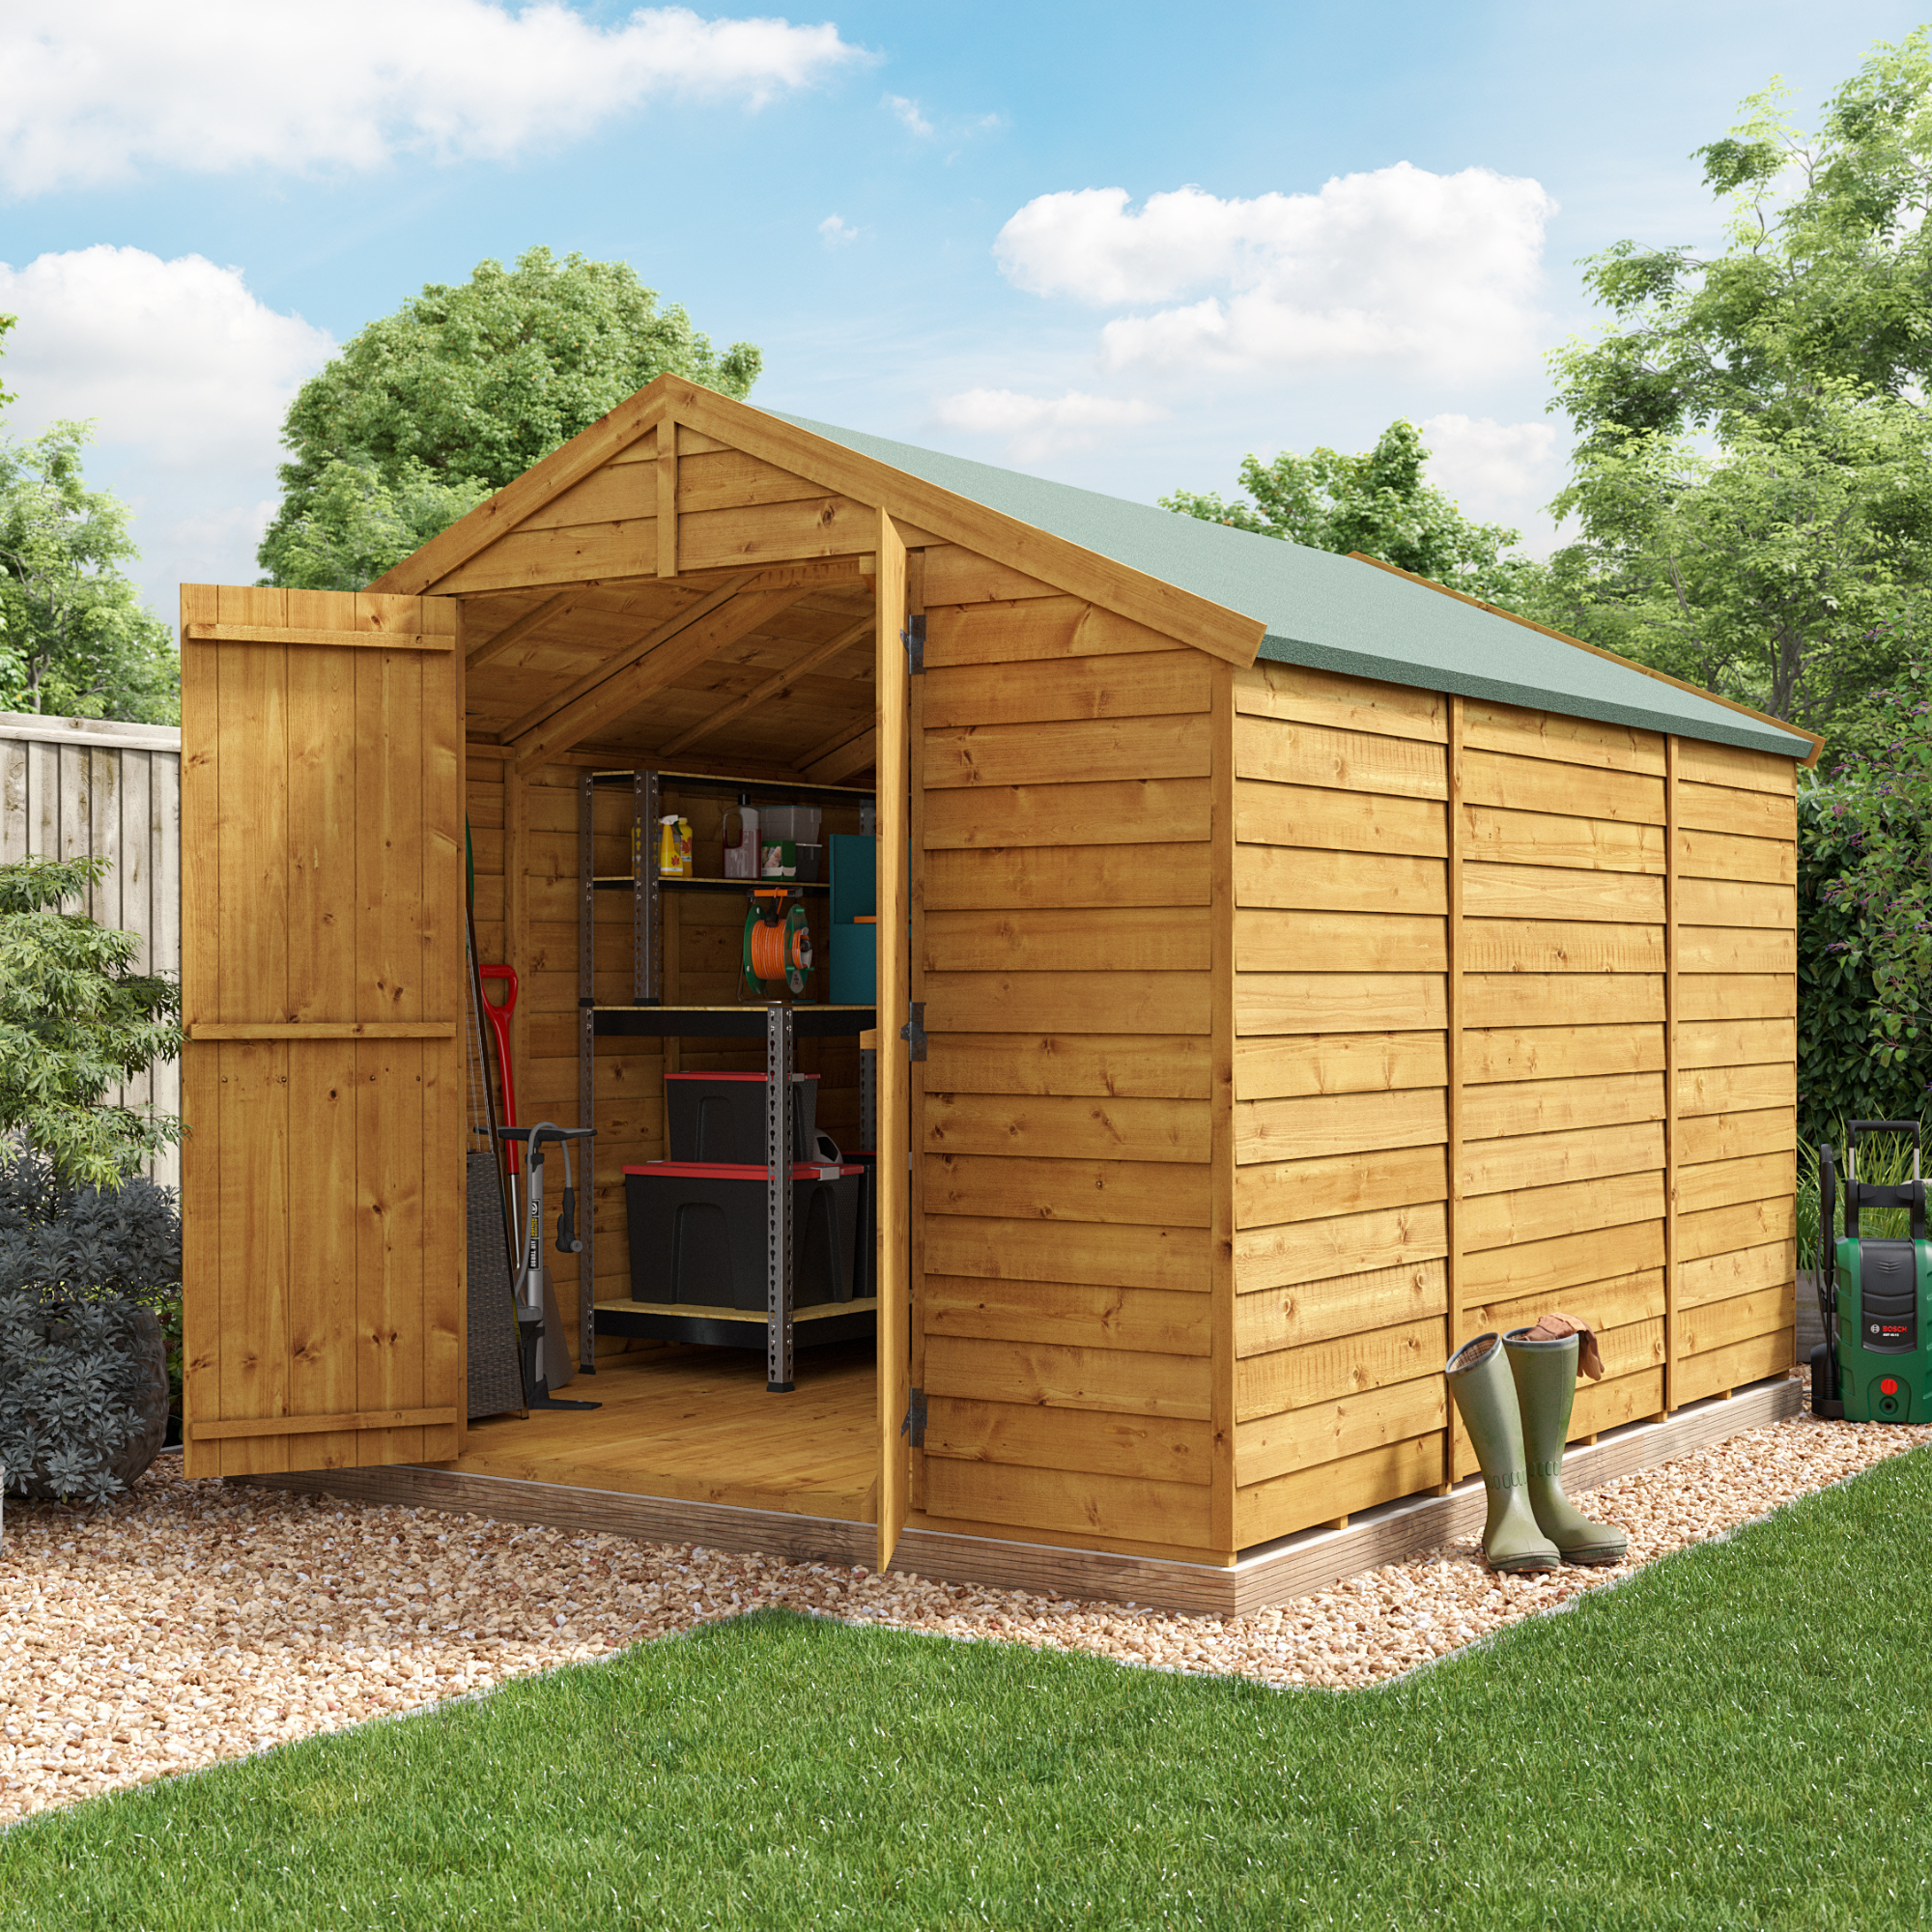 10 x 8 Pressure Treated Shed - BillyOh Keeper Overlap Apex Wooden Shed - Windowless 10x8 Garden Shed